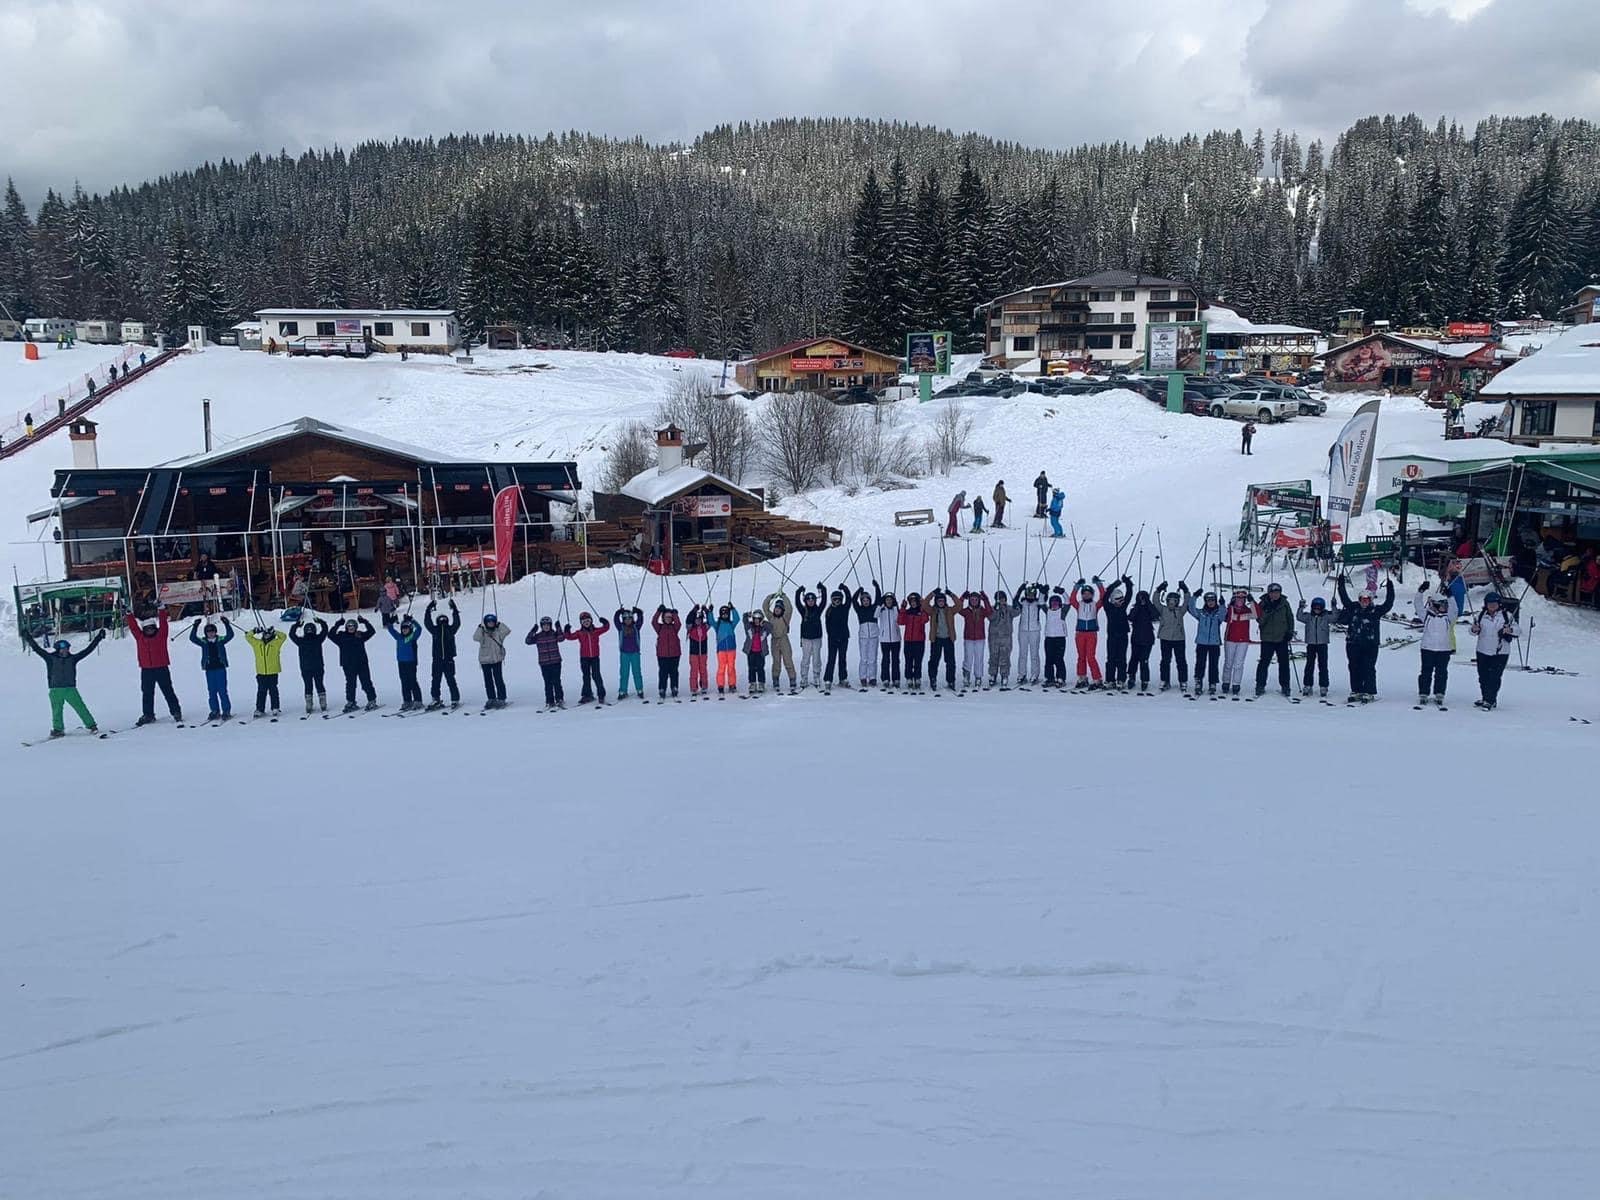 SKIING: 40 Pupils attended the ski trip to the slopes of Pamporovo, Bulgaria